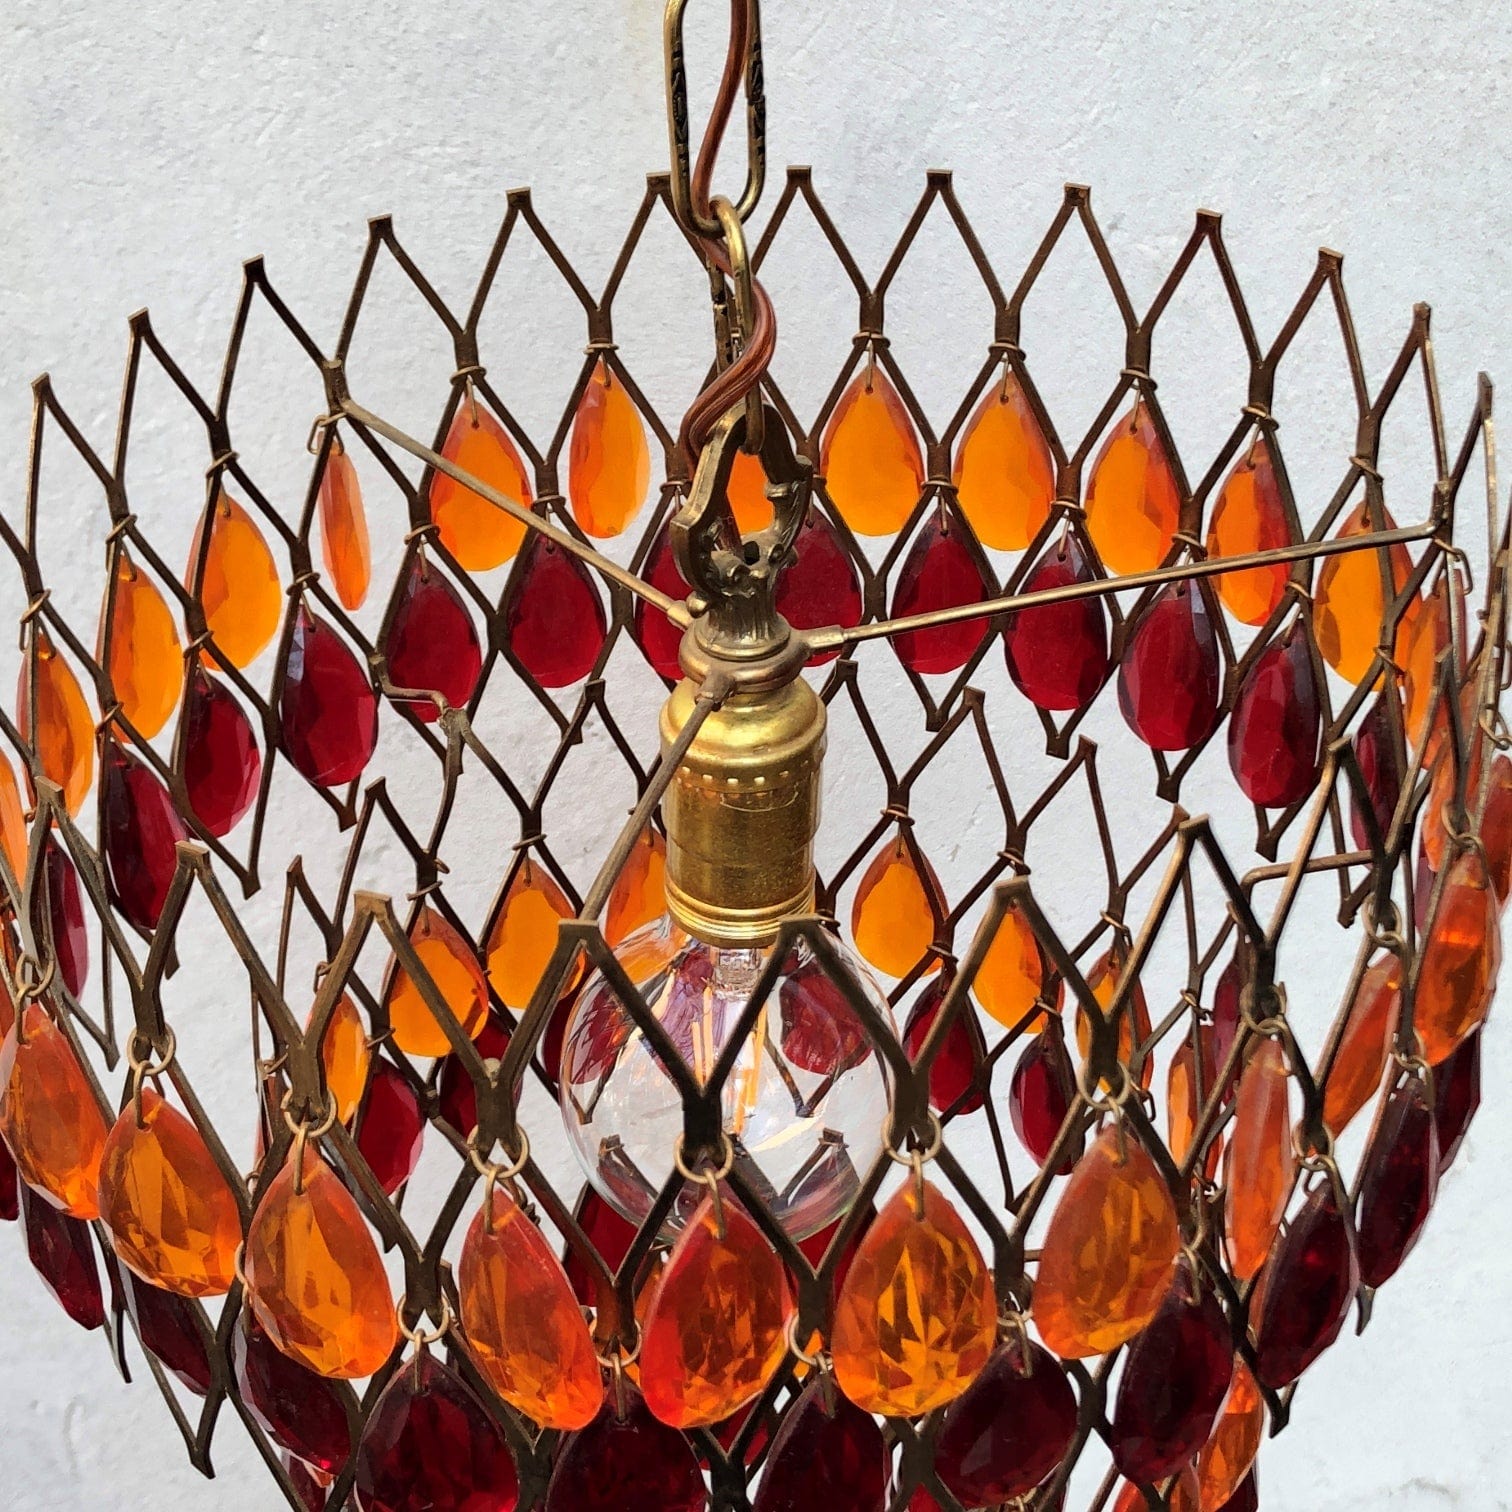 I Like Mike's Mid Century Modern lighting Vintage Mod Orange Red Hanging Chandelier, 1960s Swag Lamp, Two Available